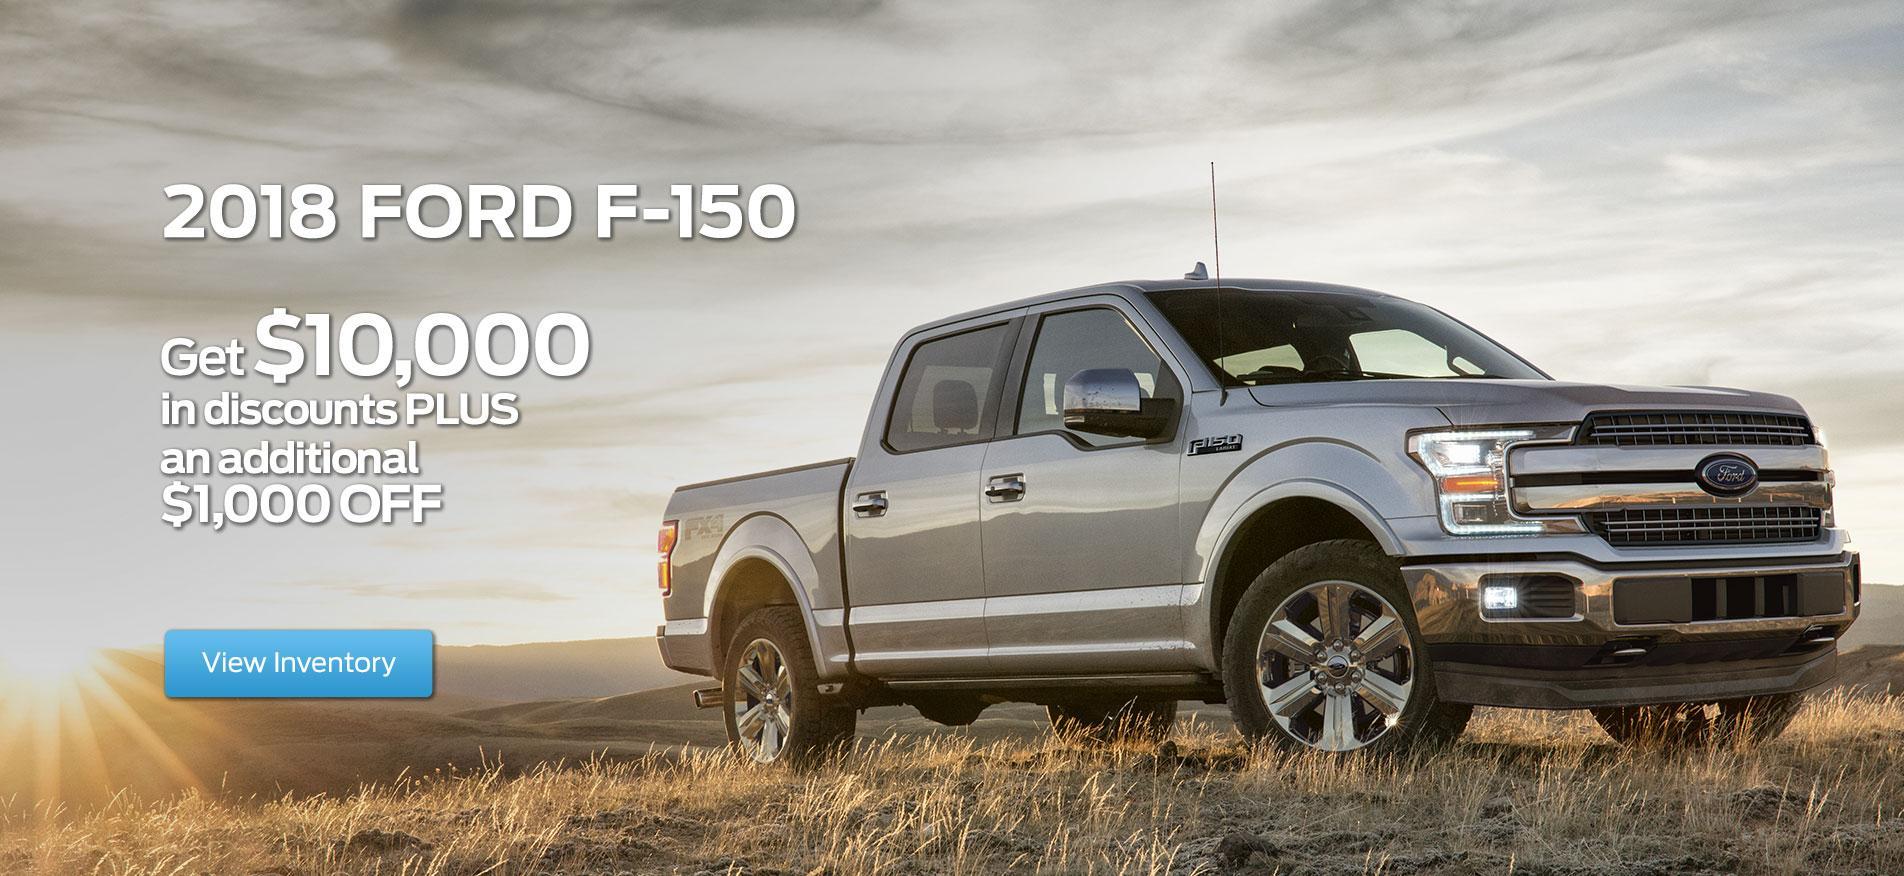 Taylor Ford Lincoln | Dealer in Moncton, NB | Riverview, Dieppe